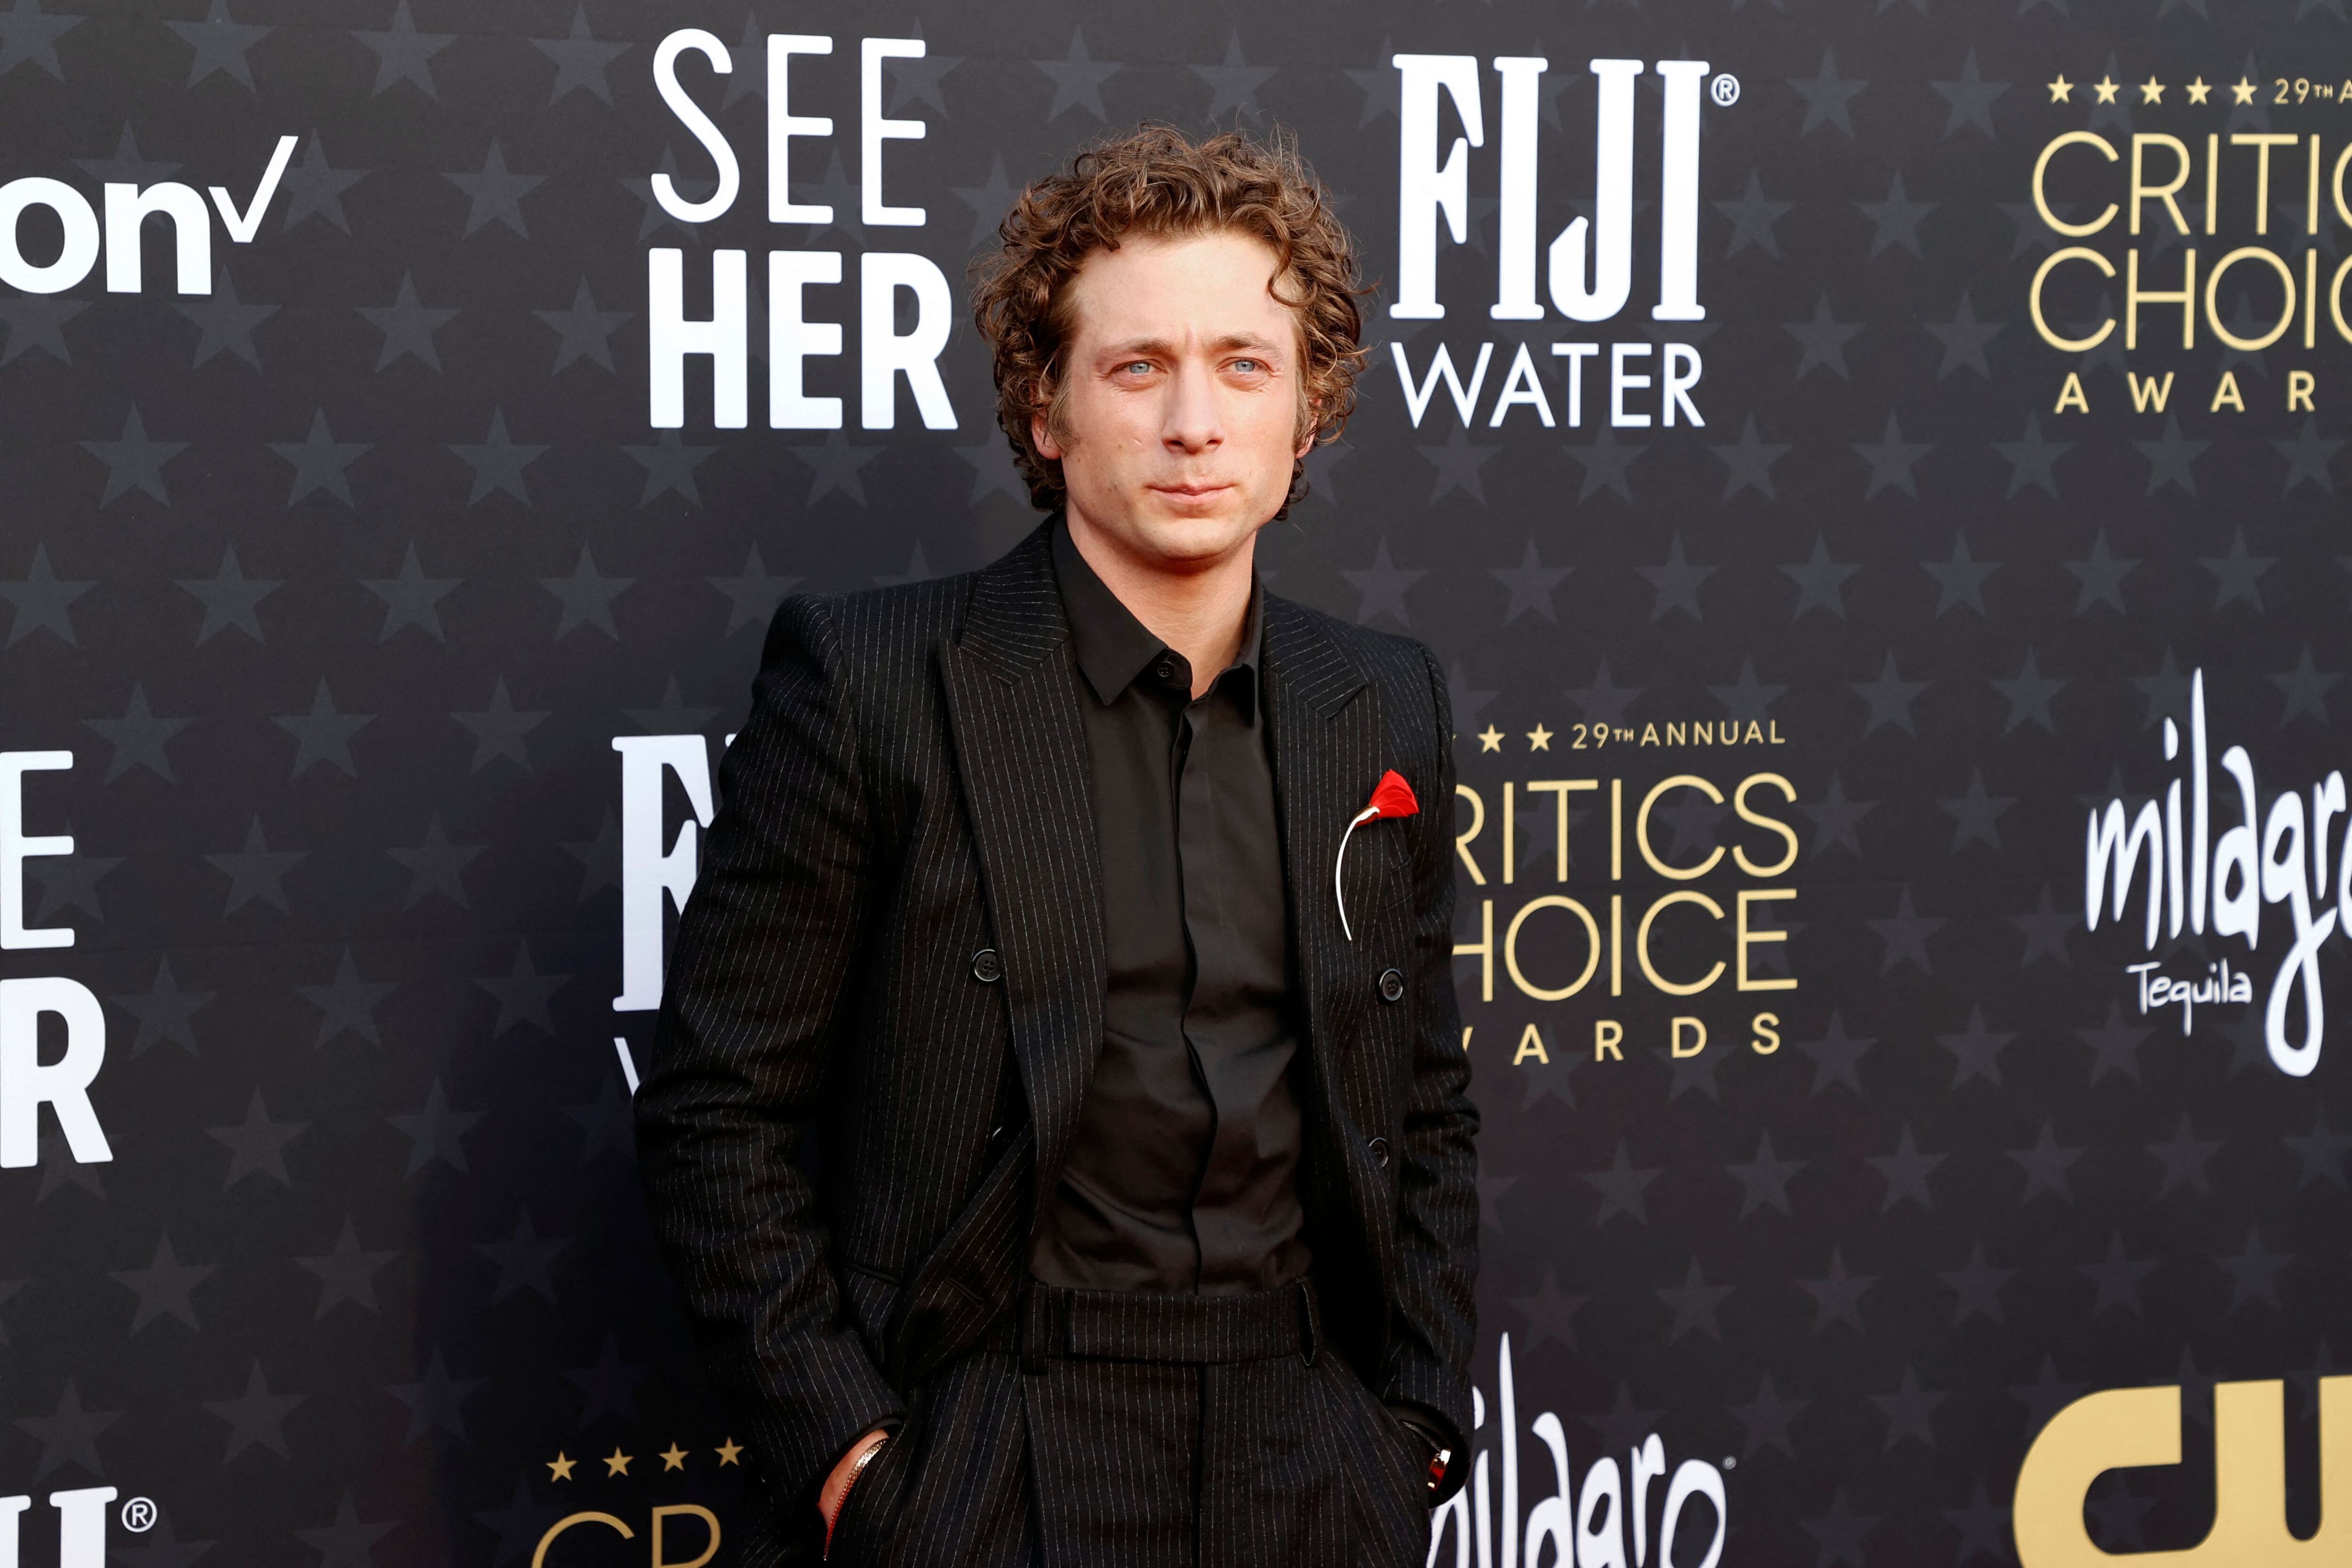 US actor Jeremy Allen White arrives for the 29th Annual Critics Choice Awards at the Barker Hangar in Santa Monica, California on January 14, 2024. (Photo by Michael TRAN / AFP)